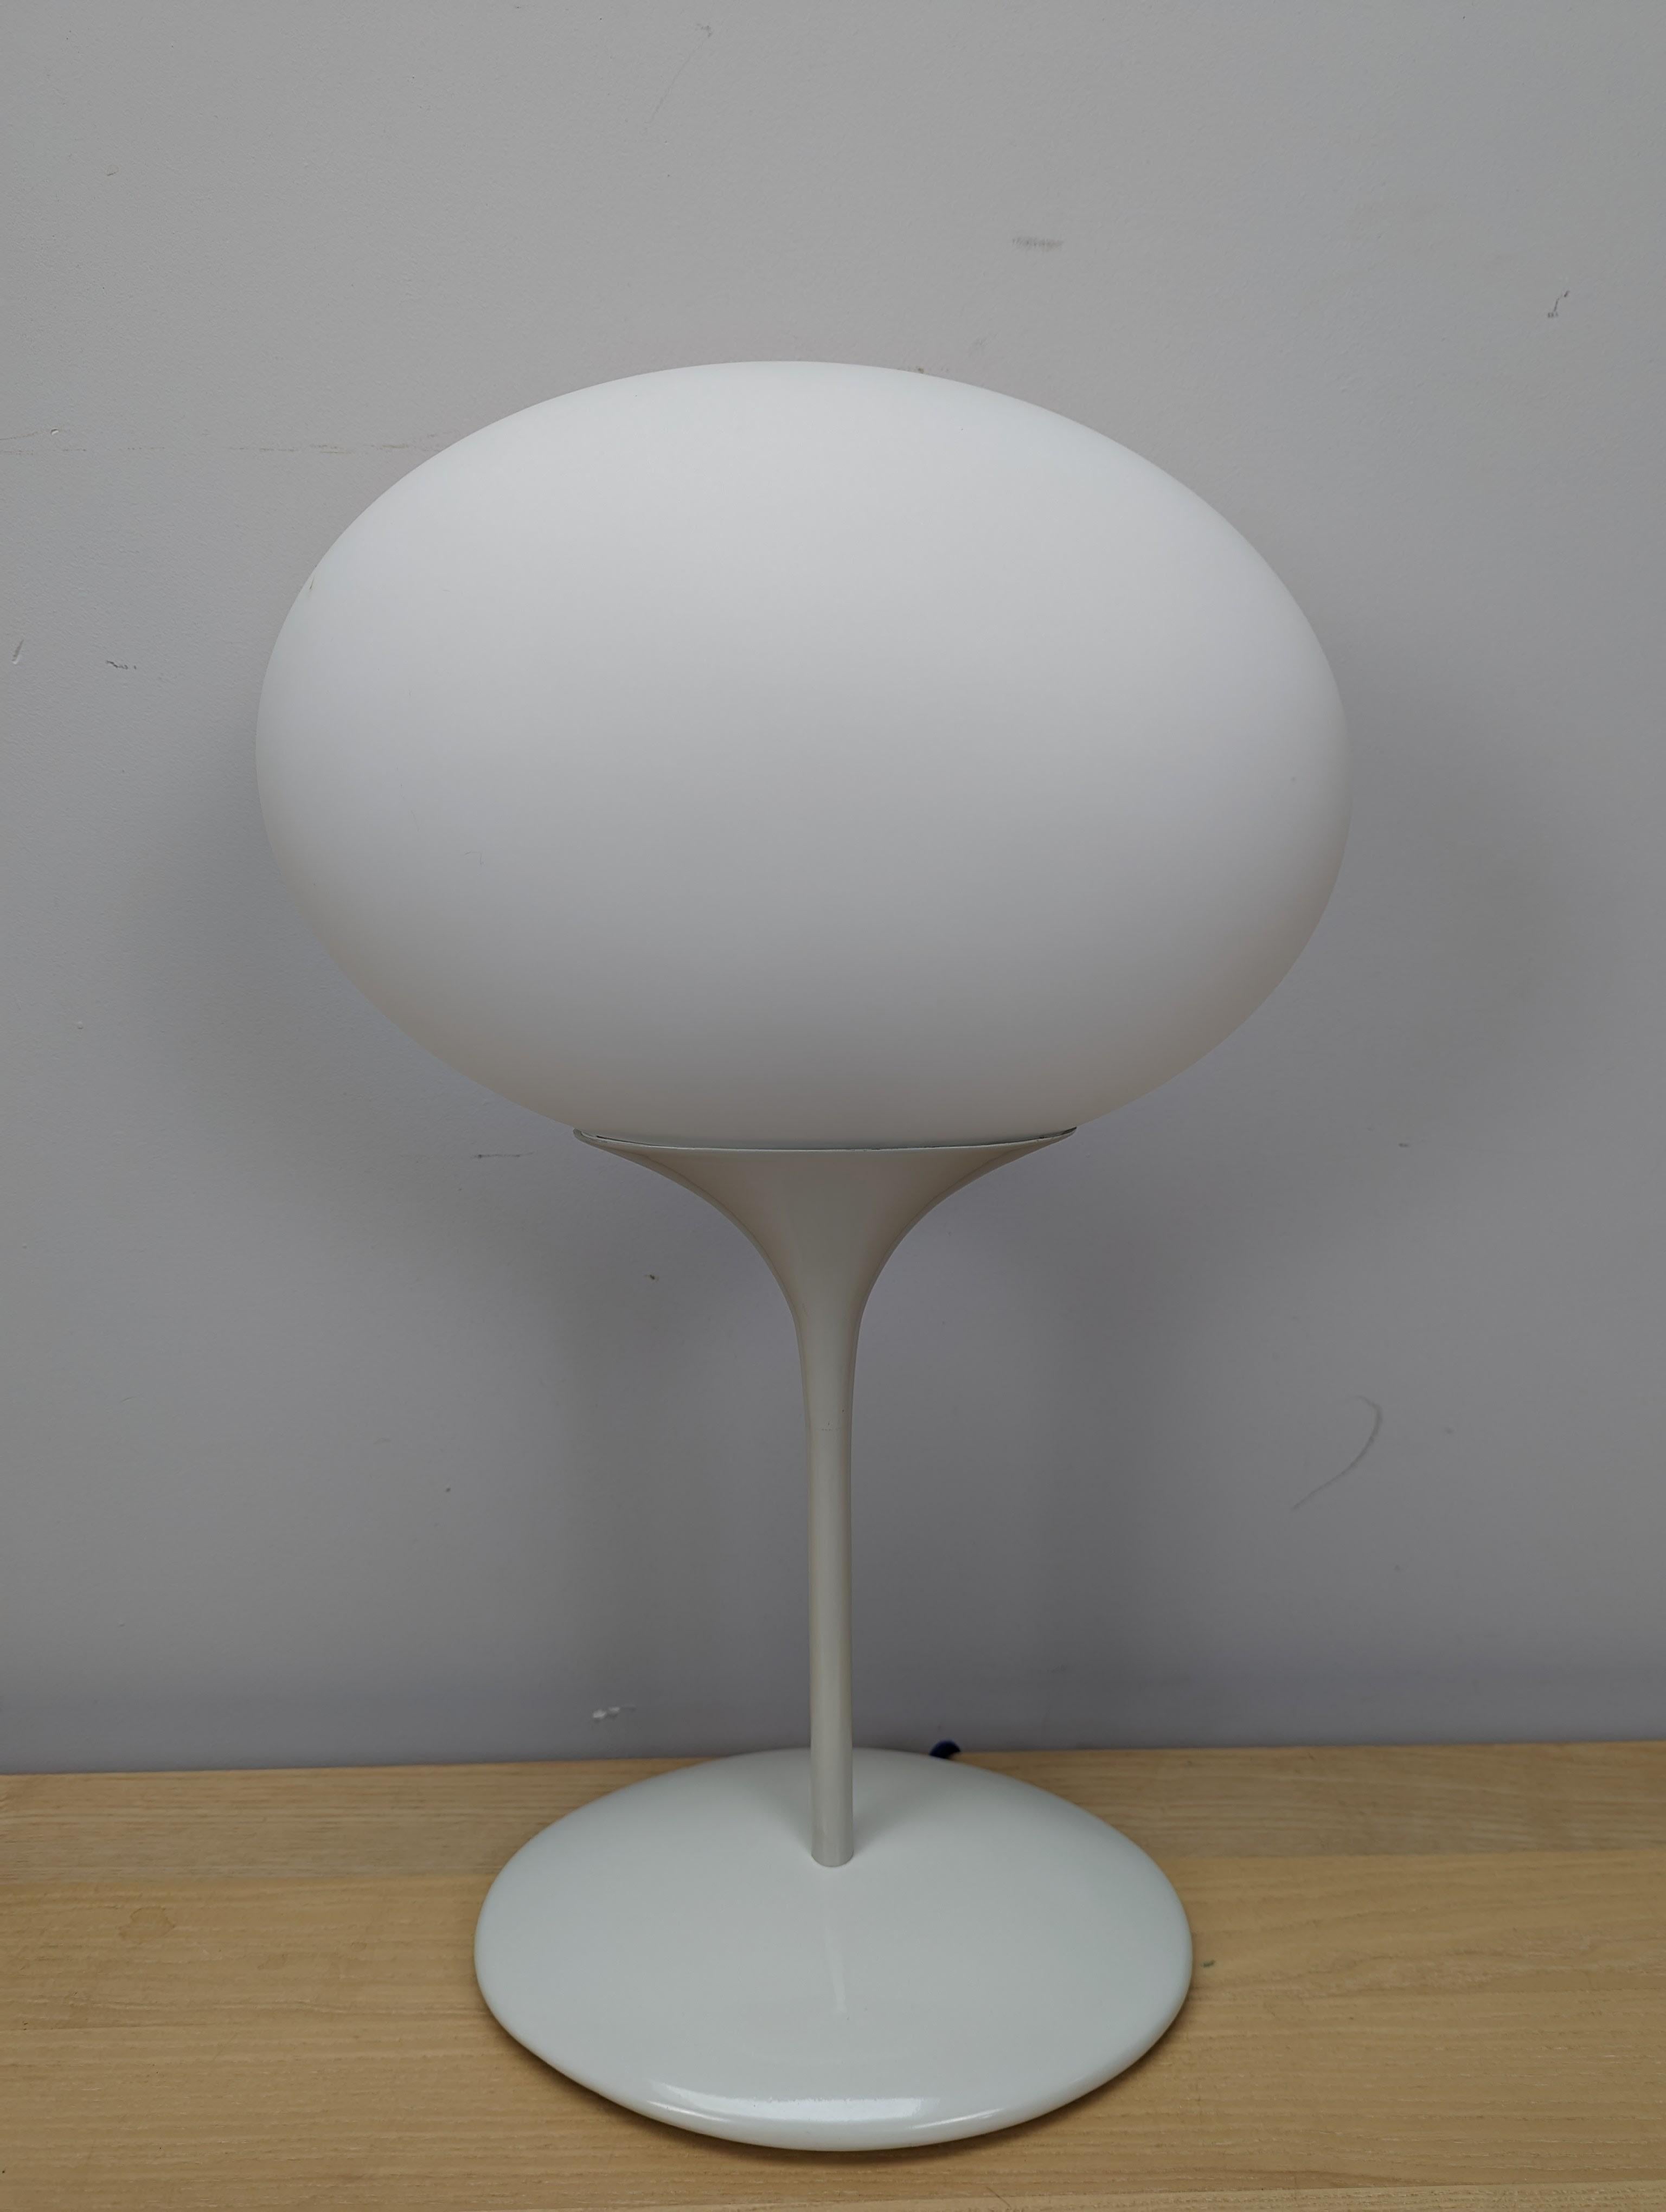 Conran lighting Nimbus bedside table lamp.

A stunning piece of design that is extremely rare.

Beautifully shape with Acid etched Opaline shade, white powder coated metal base, and dimmer.